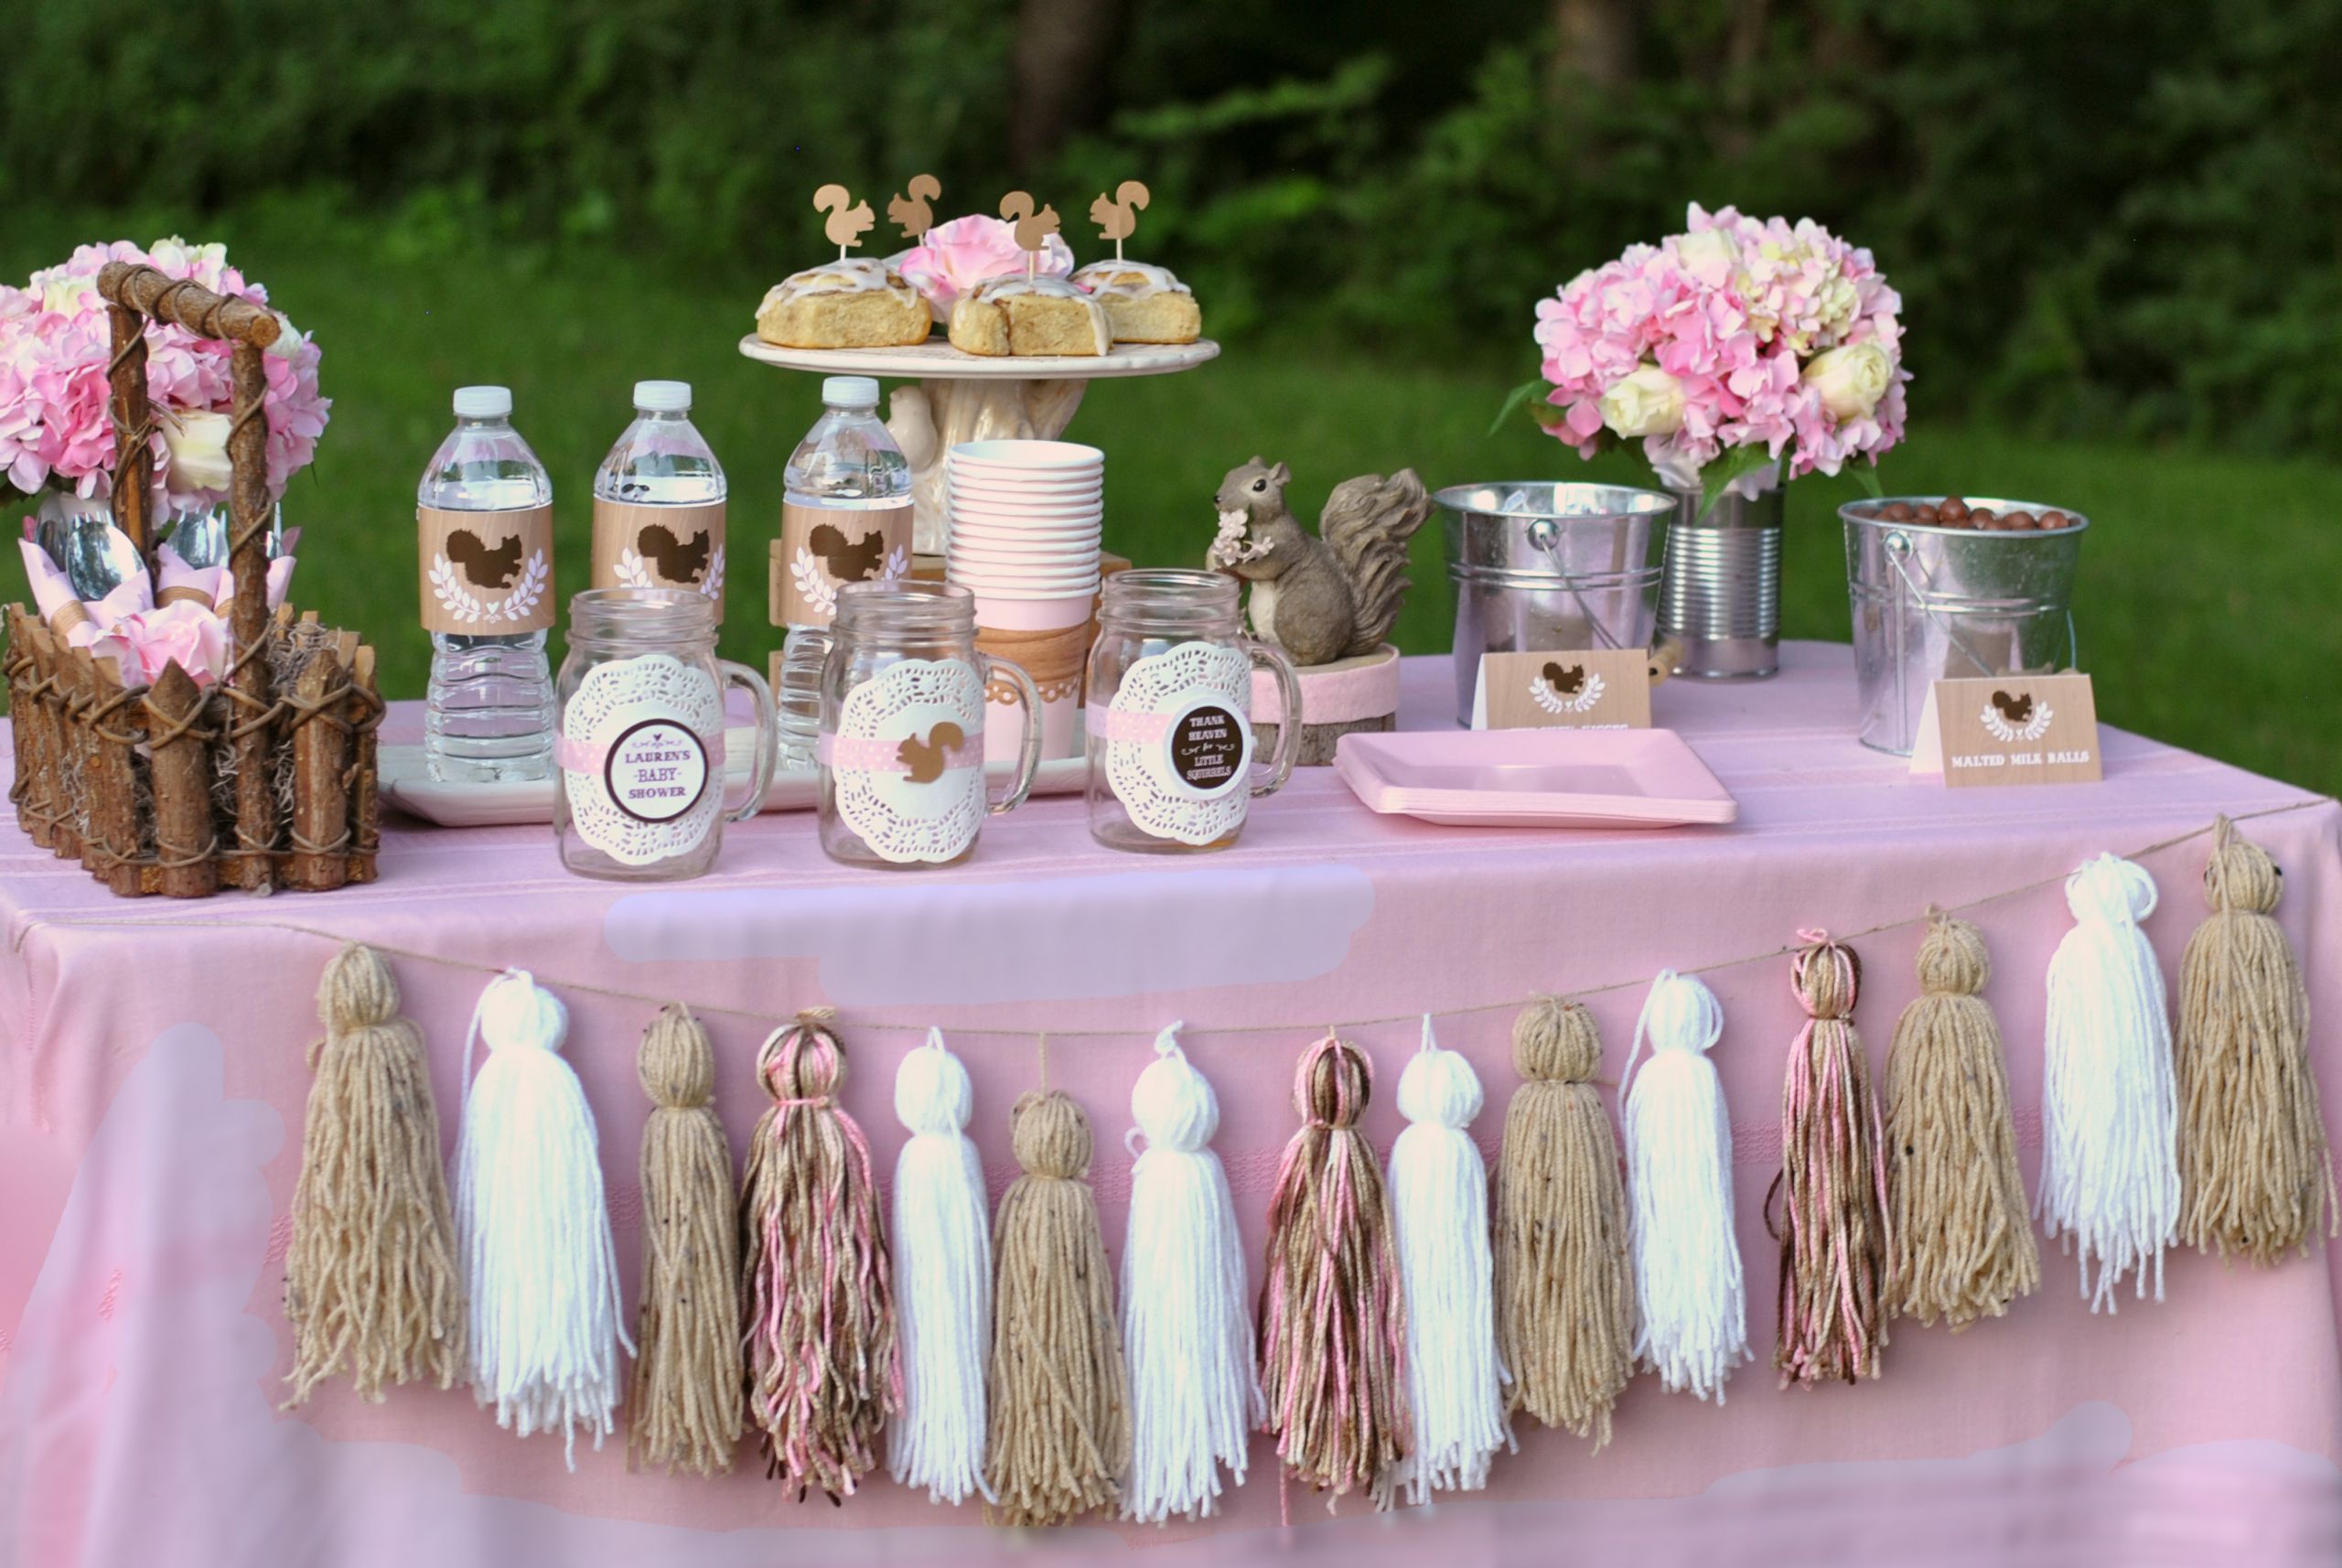 Baby Shower Ideas For A Girl Decorations
 Baby Shower Themes for Girls Inspirations They Don t Have